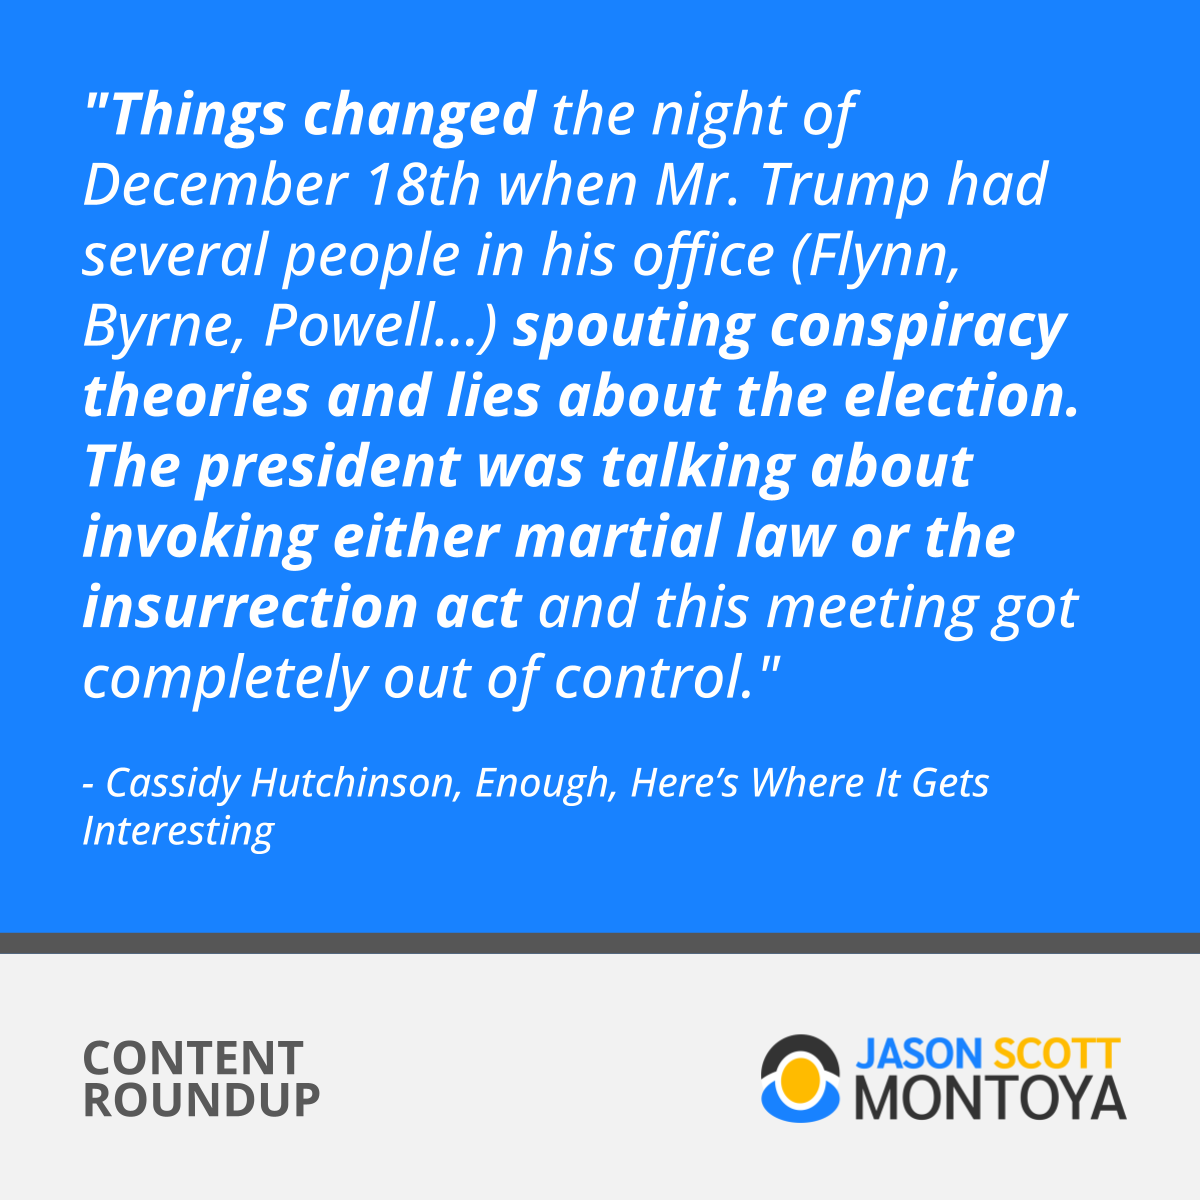 "Things changed the night of December 18th when Mr. Trump had several people in his office (Flynn, Byrne, Powell...) spouting conspiracy theories and lies about the election. The president was talking about invoking either martial law or the insurrection act and this meeting got completely out of control."  - Cassidy Hutchinson, Enough, Here’s Where It Gets Interesting